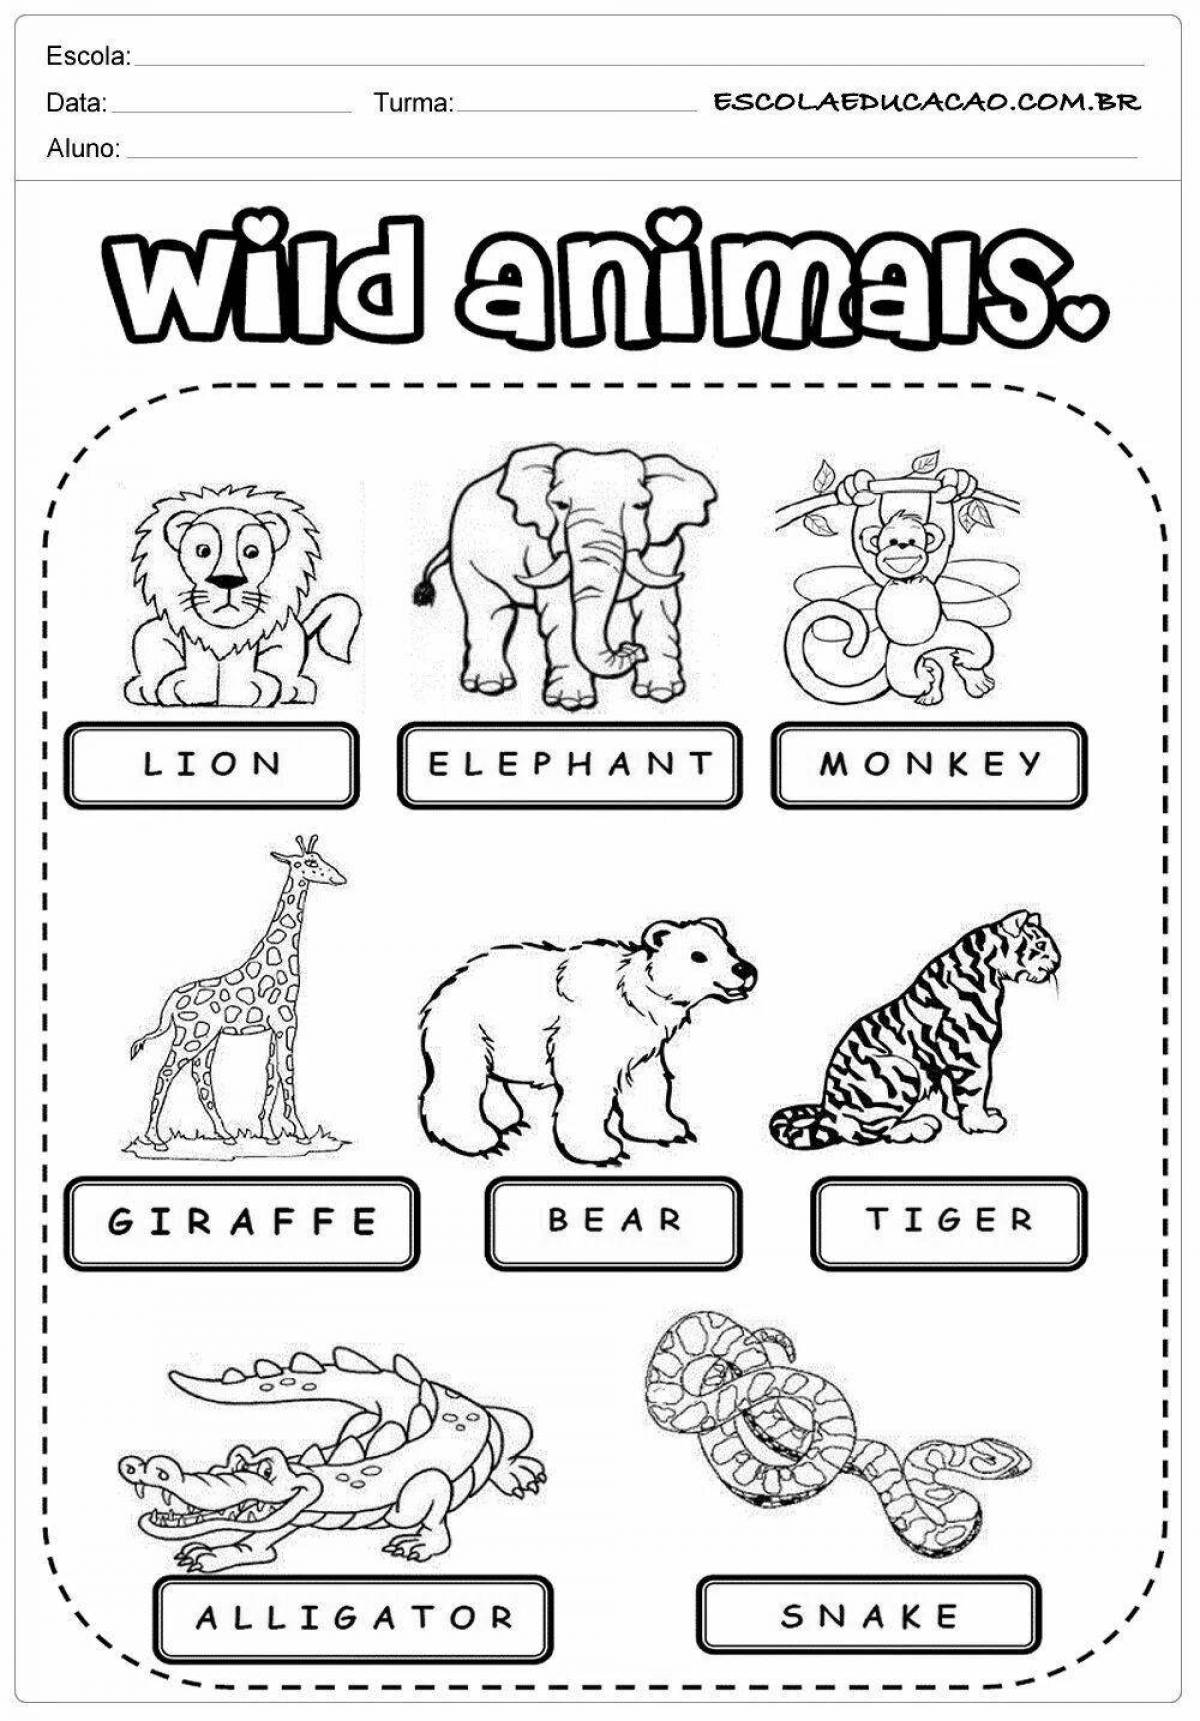 Live Animal Coloring Pages in English